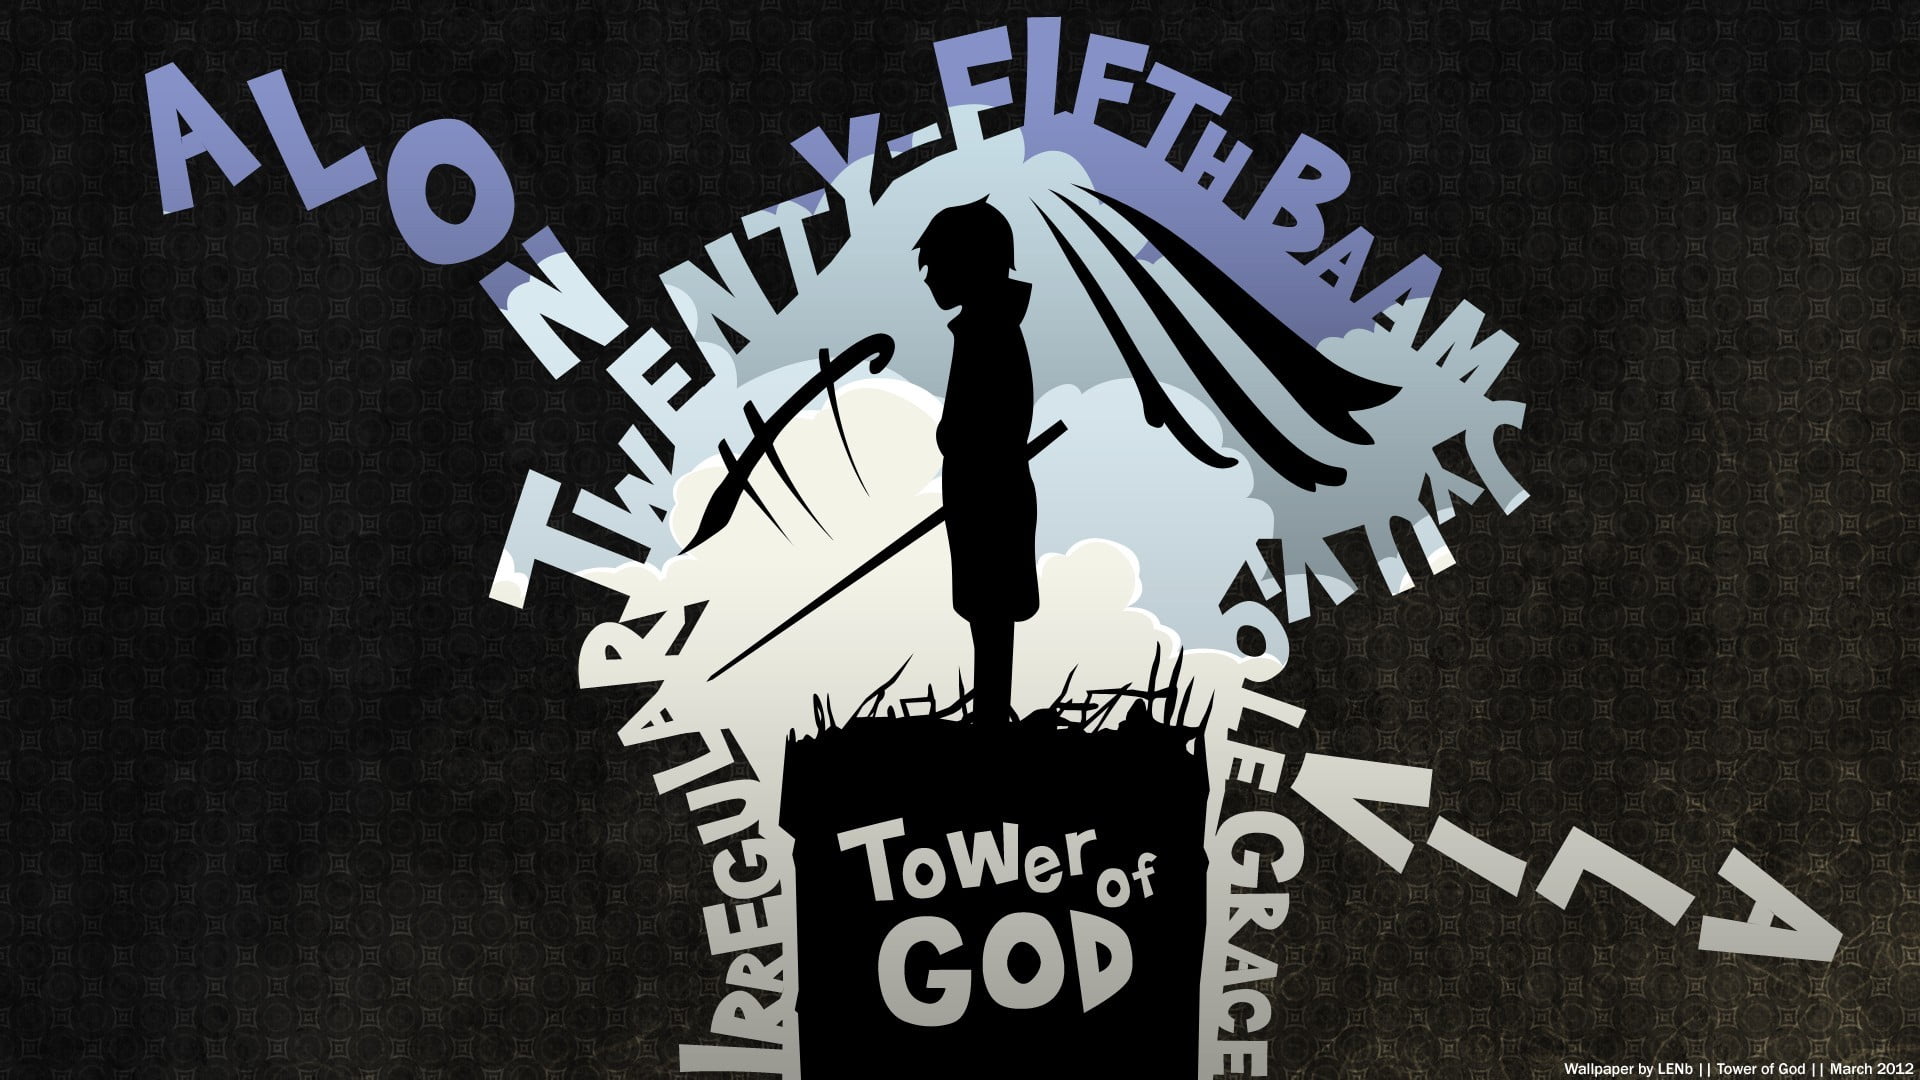 Tower of God, baam, communication, text, western script, adult